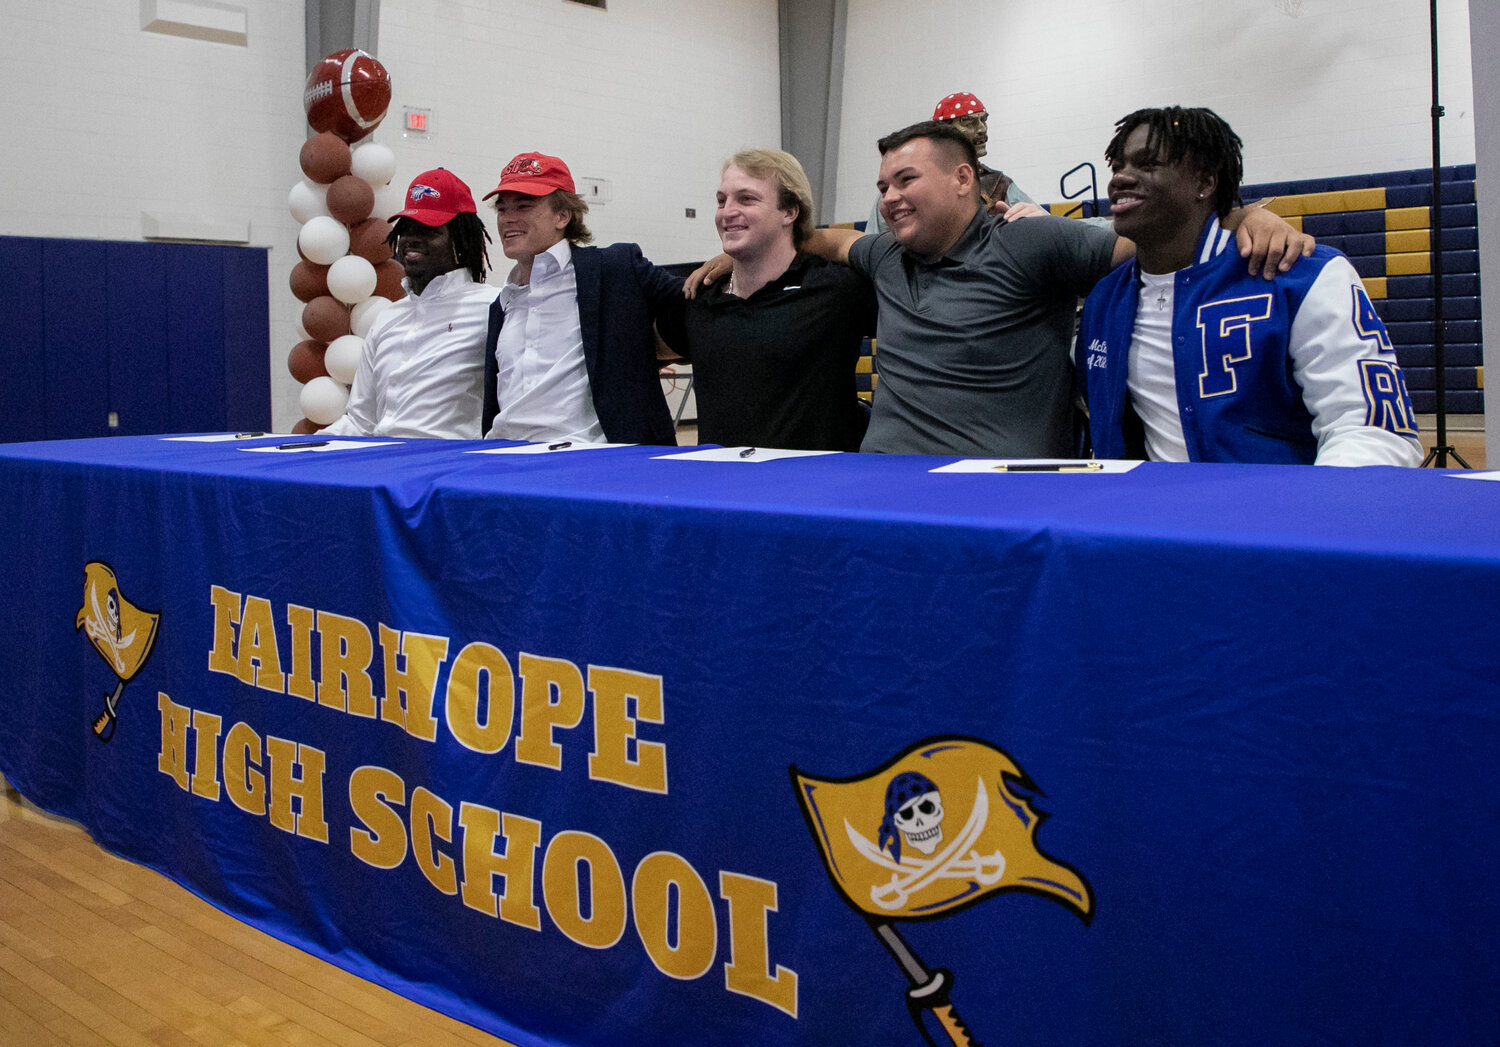 The next generation of Fairhope alumni playing college football will include Lashavion Brown, Caden Creel, Cory Devole, Mickey Herrick and Qualin McCants. The quintet was recognized among 17 student-athletes who signed National Letters of Intent Monday, April 17, at the high school.